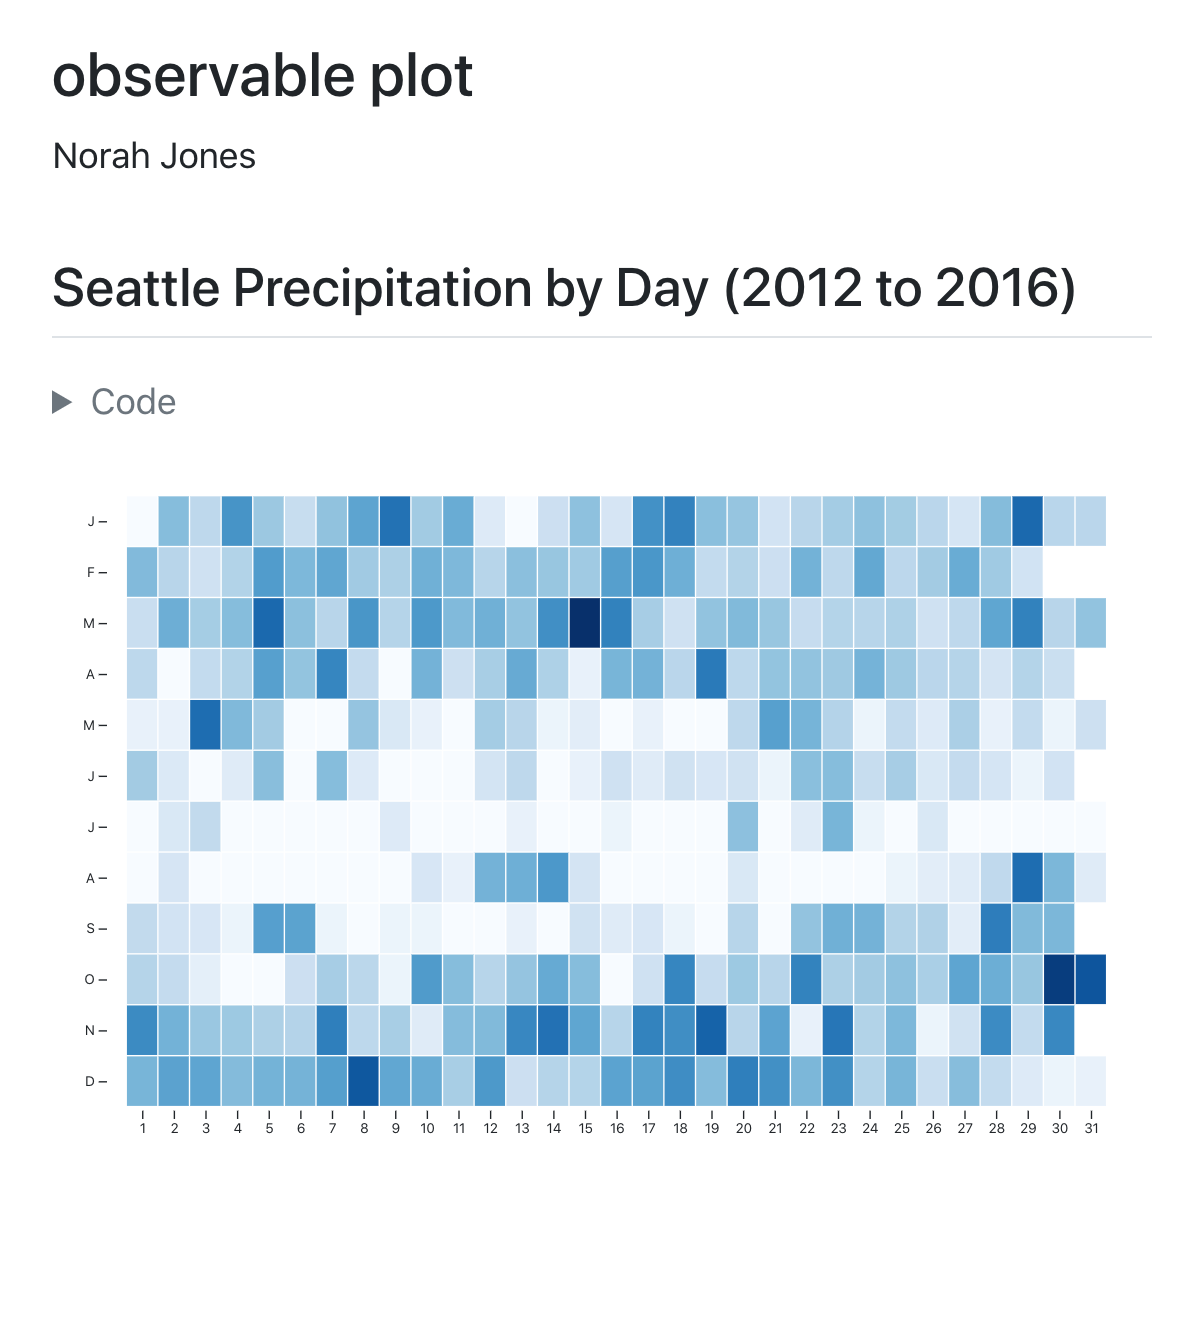 Example output with title, author, and date. Below, the main section reads Seattle Precipitation by Day (2012 to 2016) with a toggleable section to show code and a heatmap of the precipitation by day.